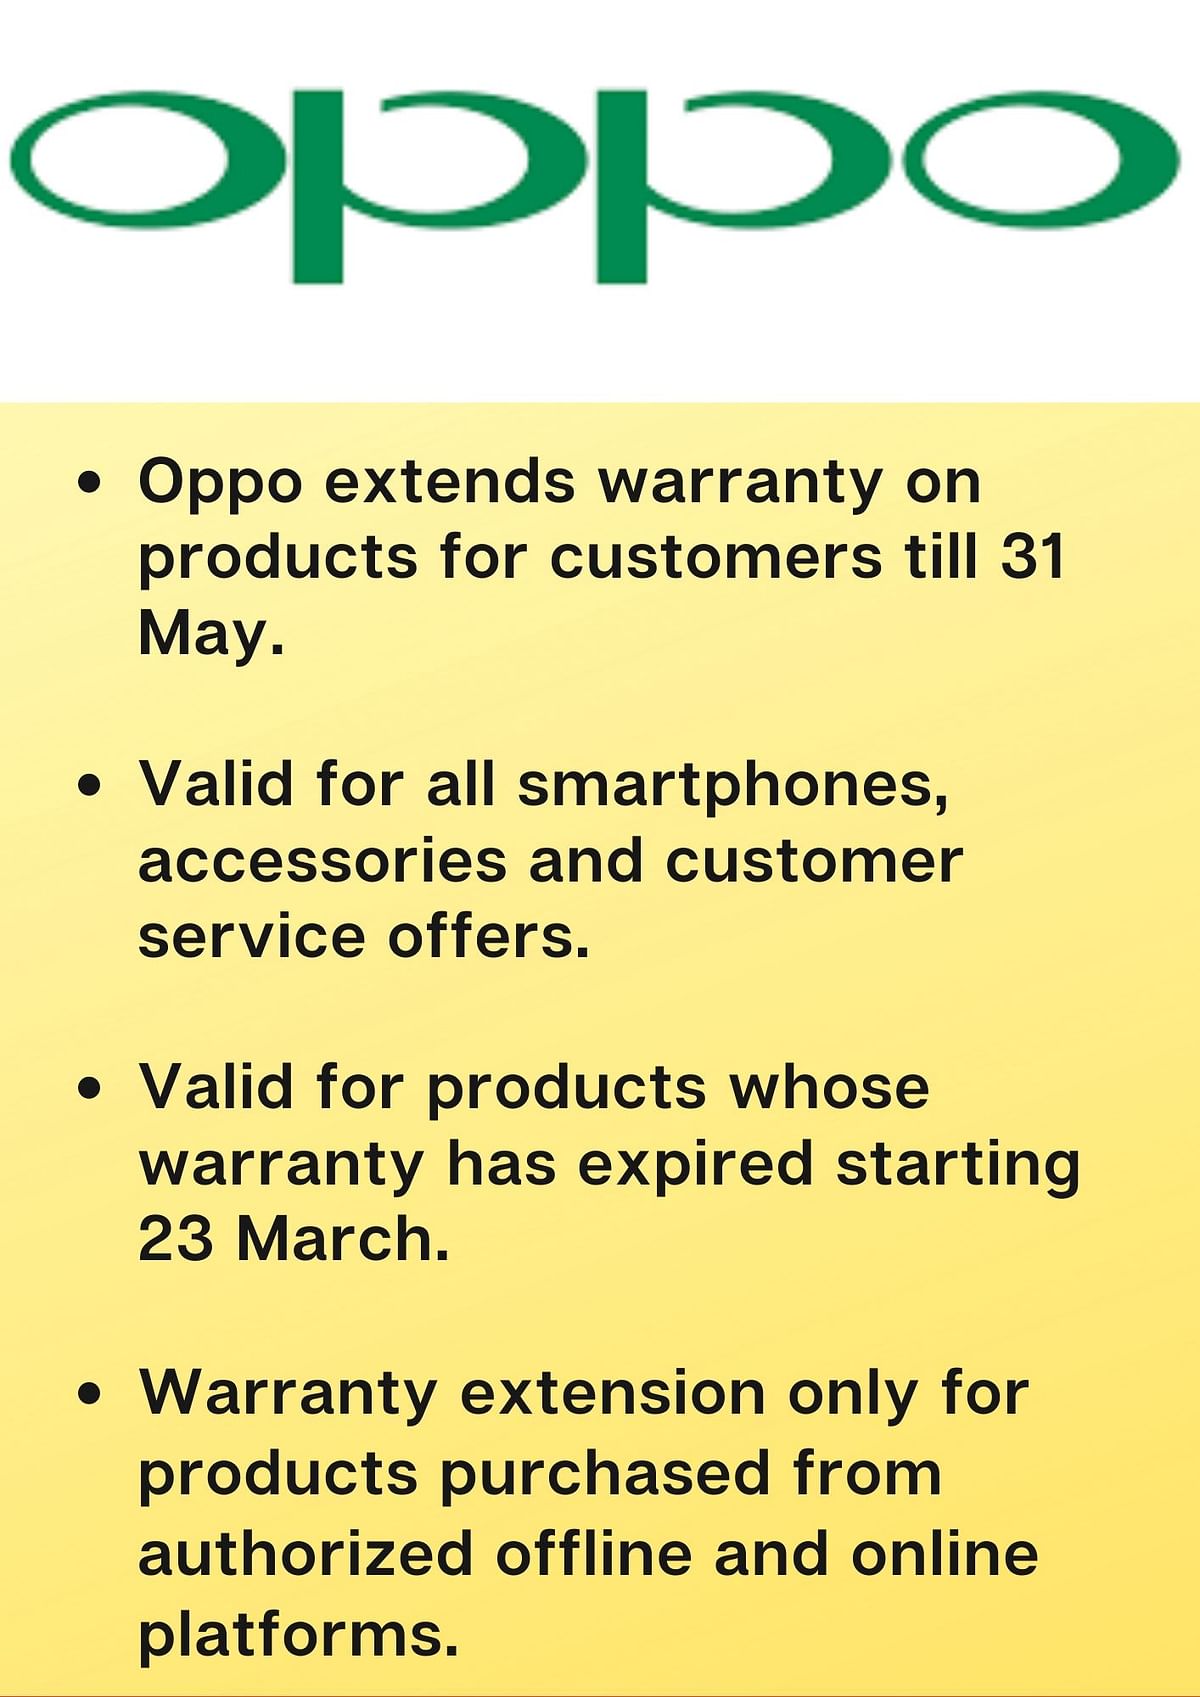 Some of the brands that are yet to announce an extended warranty program are Xiaomi, Samsung and Vivo.